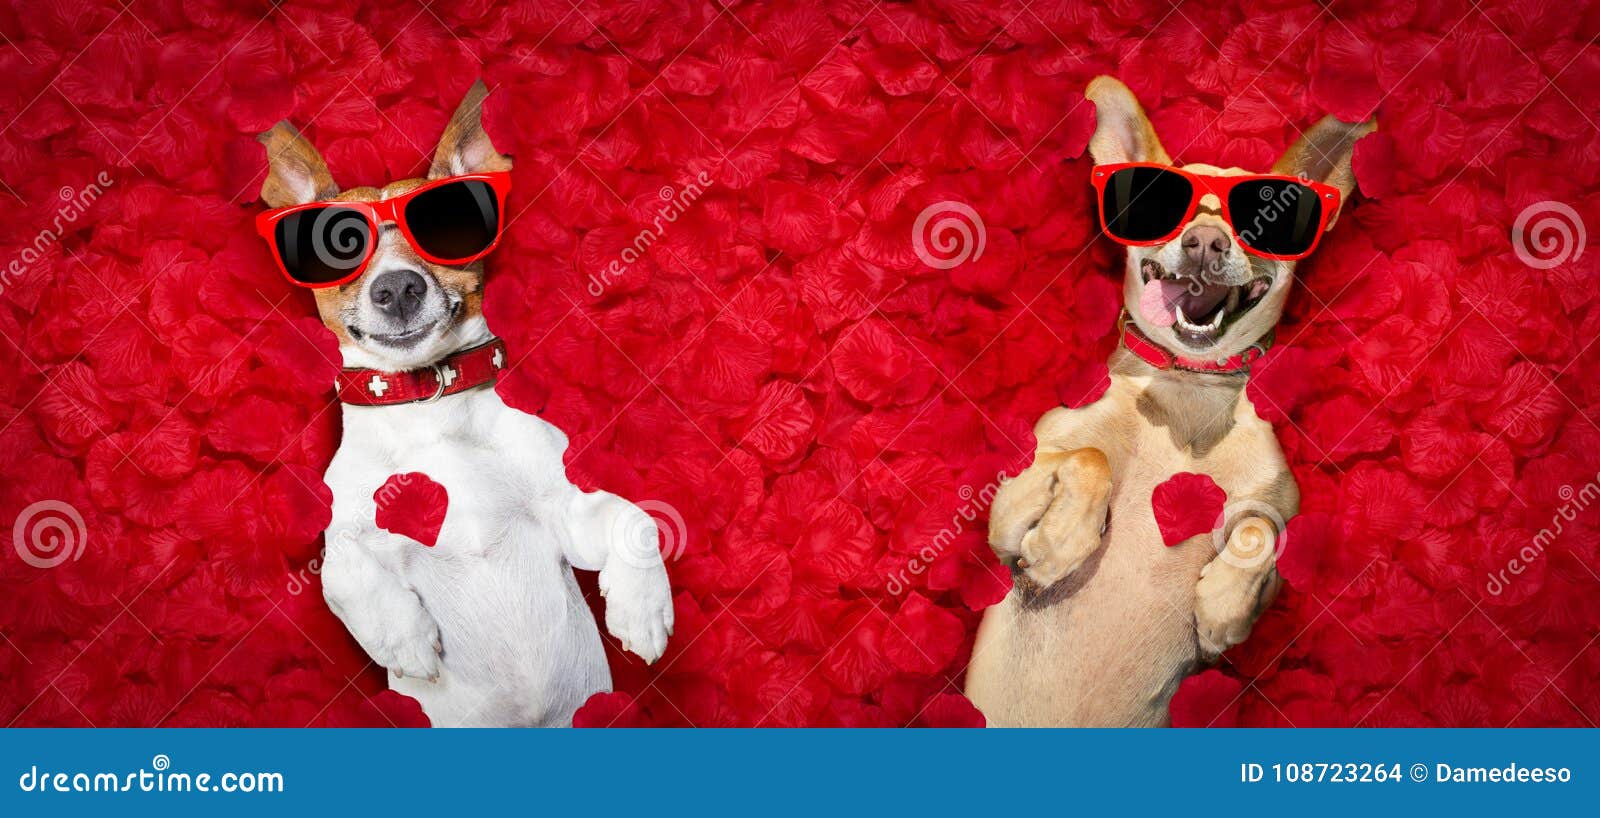 Valentines Couple Of Dogs With Rose Petals Stock Photo Image Of Park Friendship